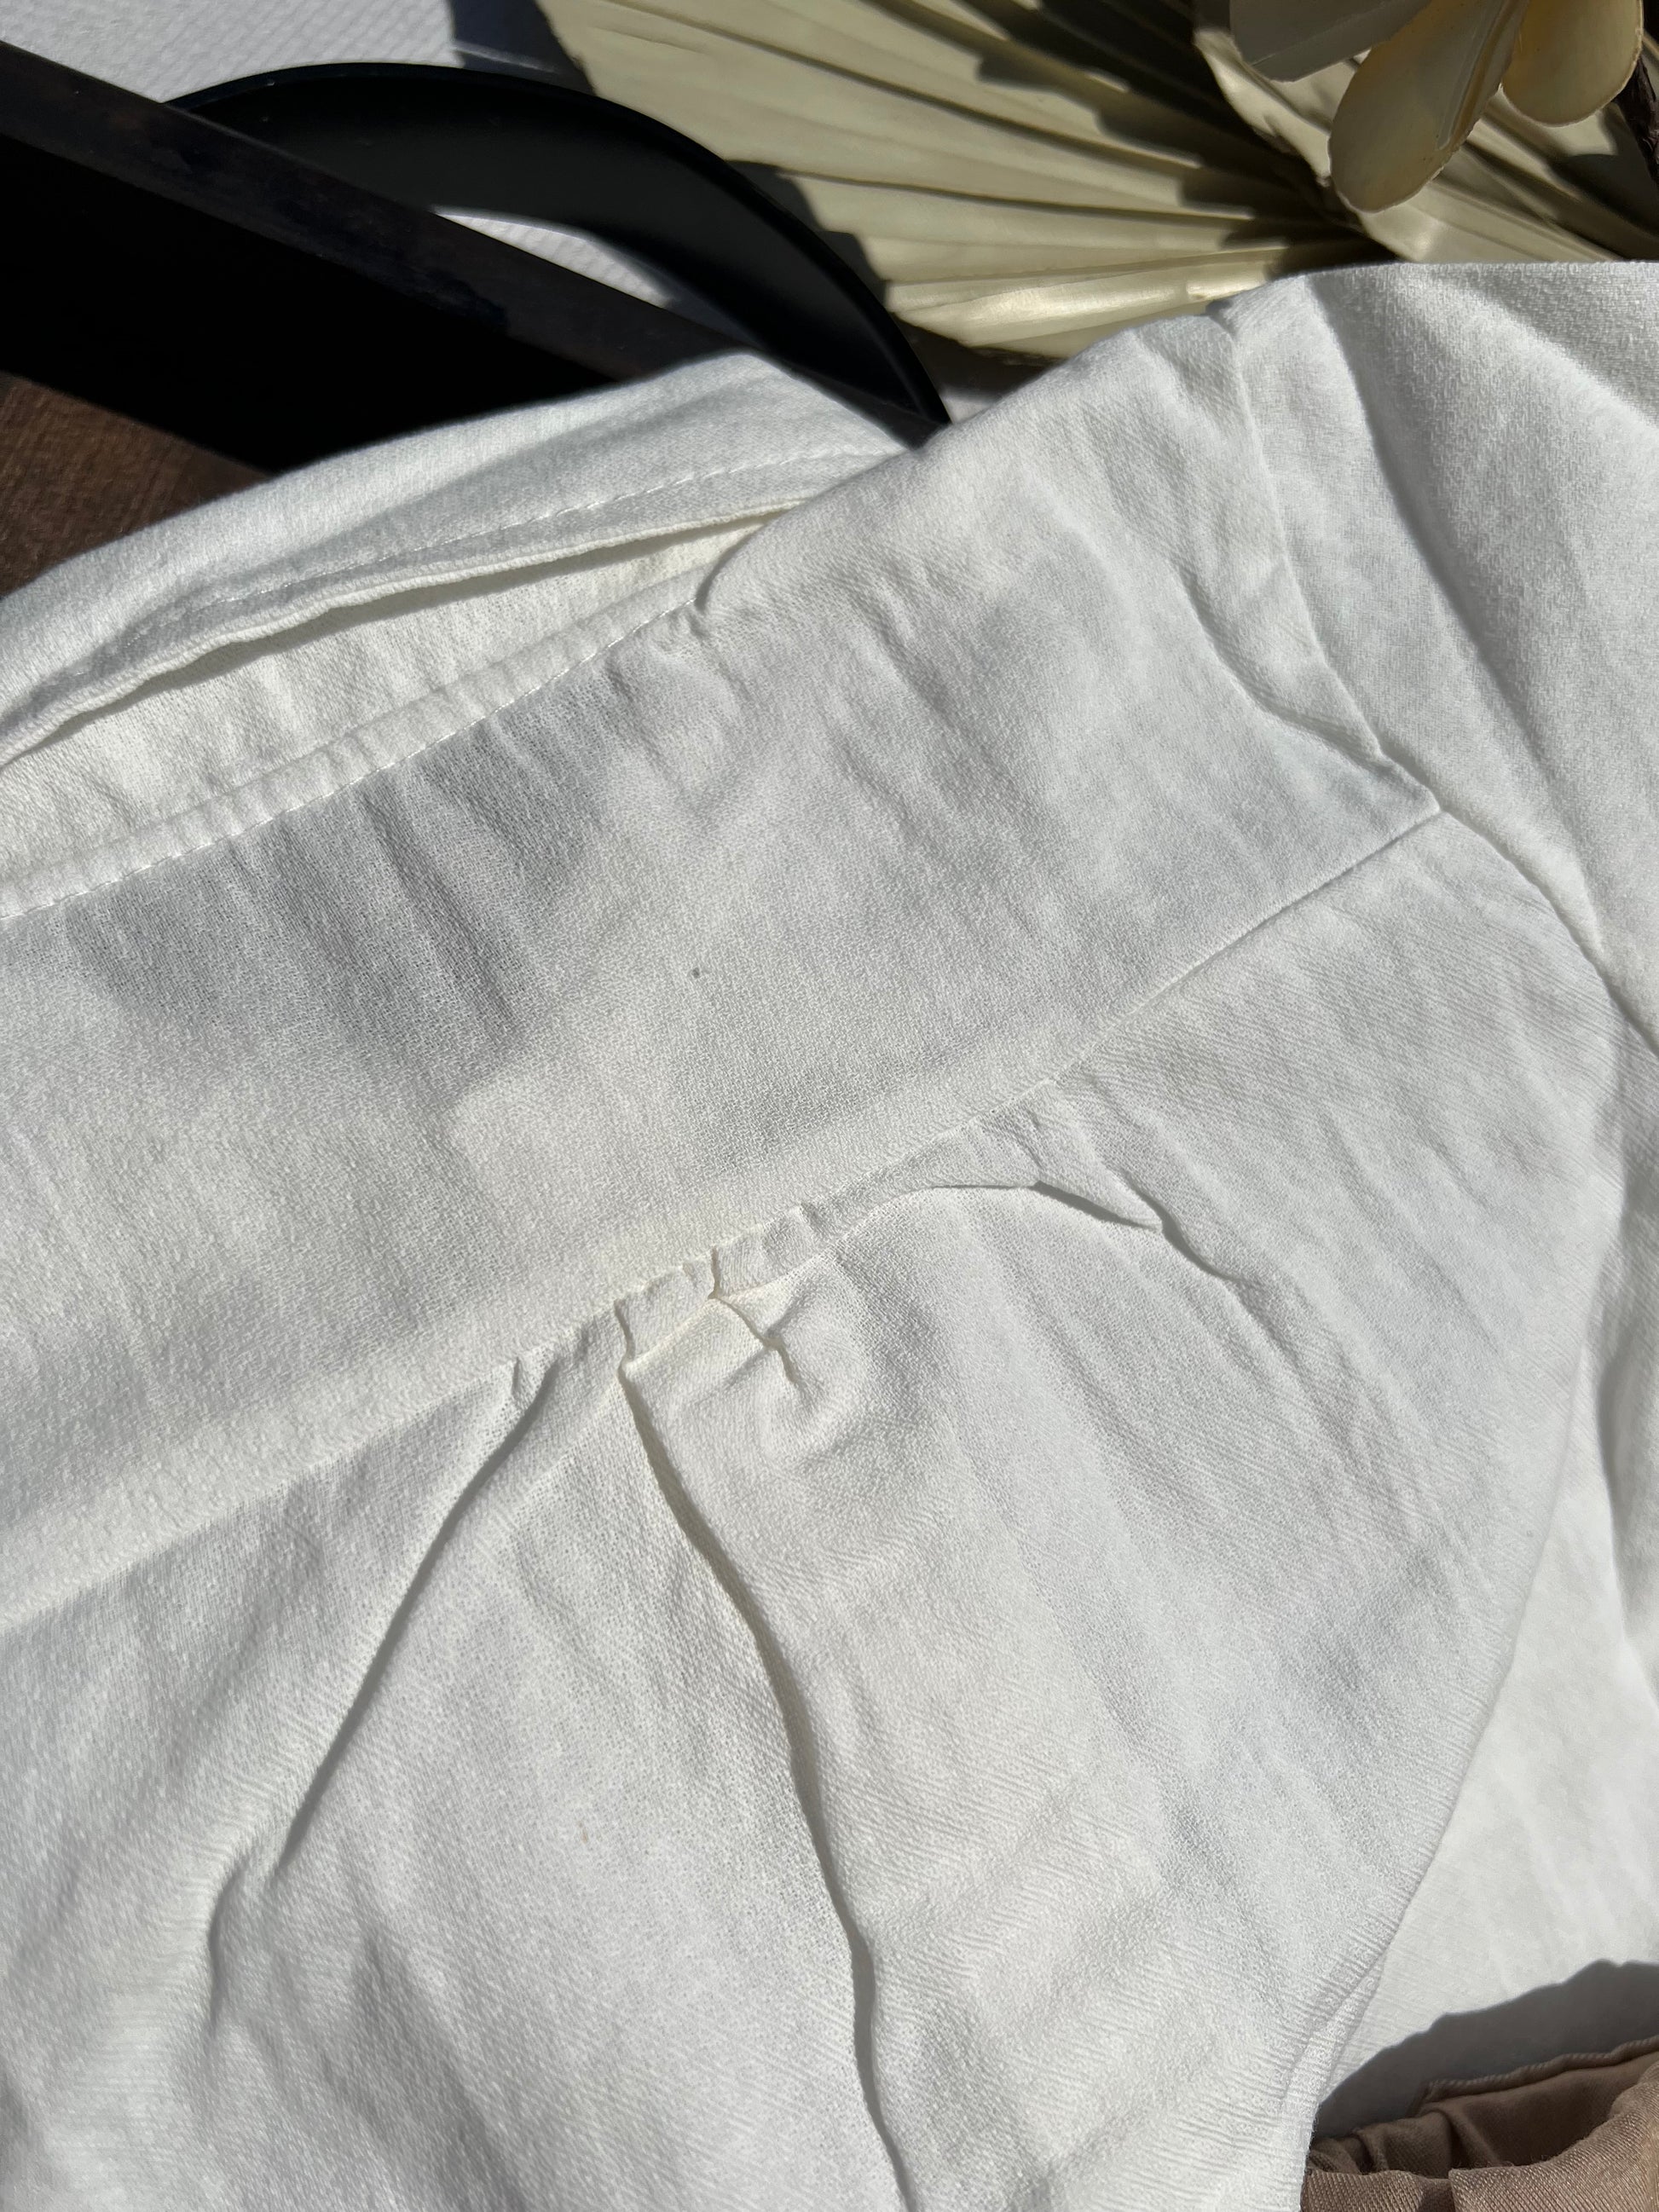 Back of Formal Baby White Button-up Dress Shirt